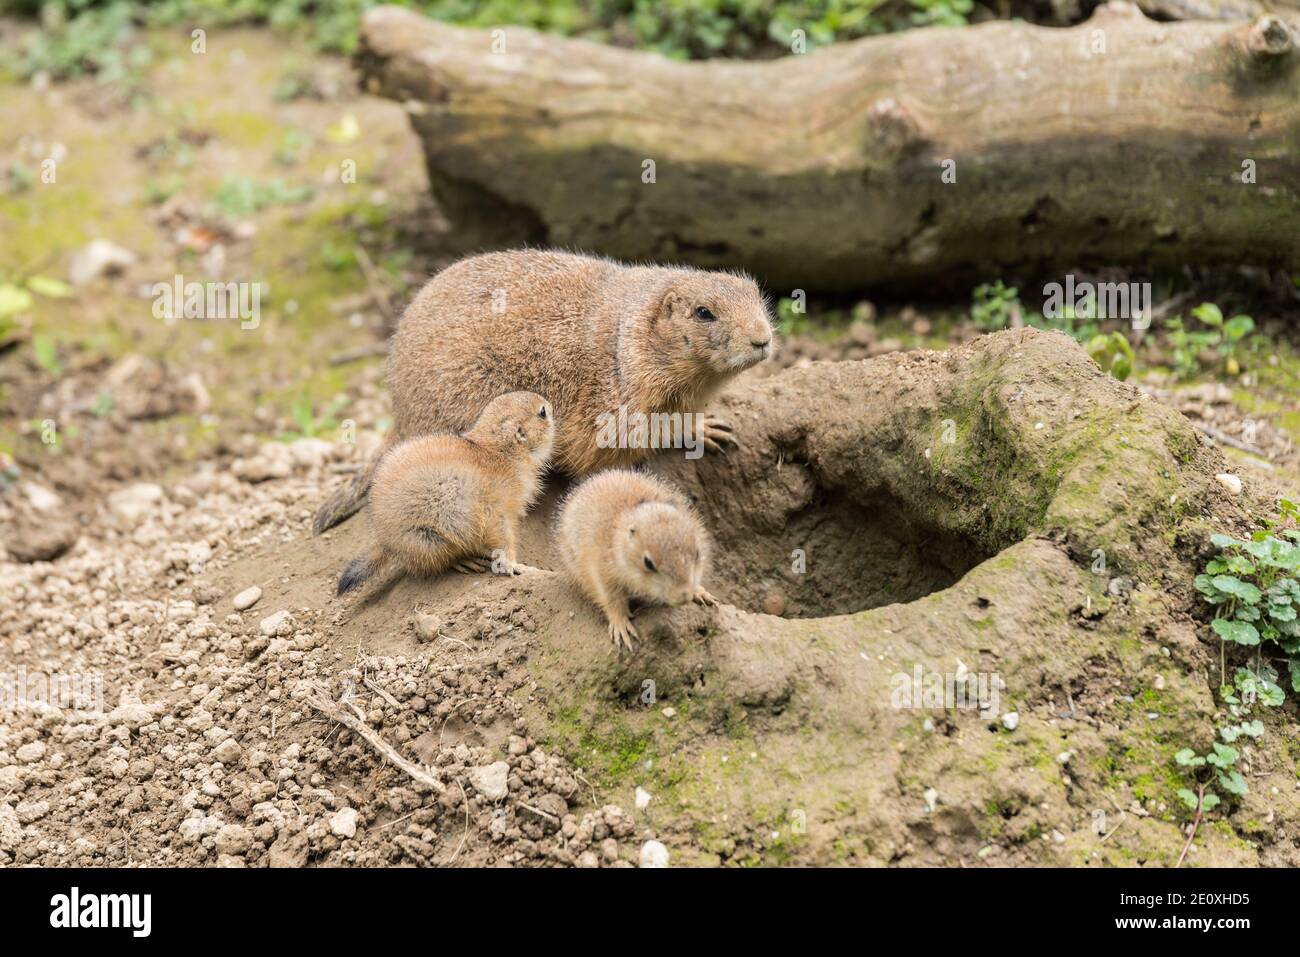 Prairie Dogs - North American Ground Squirrels With Young Animals Stock Photo